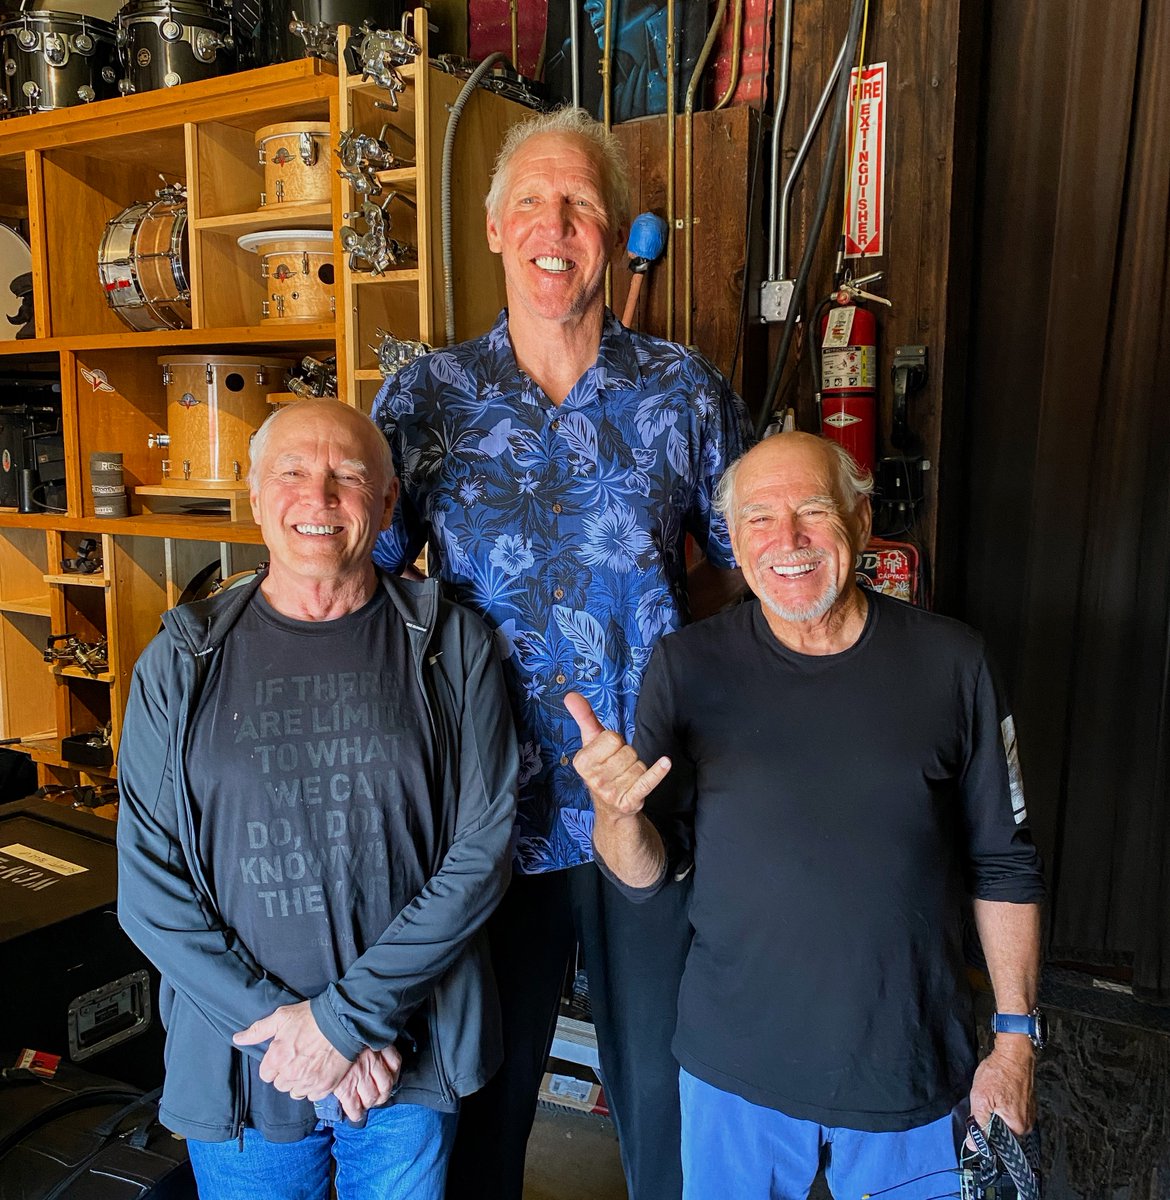 Spend some time reading about Big Red and you'll know why he and Jimmy got along so well. RIP Mr. Bill Walton. 

Seen here at the Belly Up in Solana Beach, April 2021 with Frank Marshall. 

--------------------
photo by Rob Meder